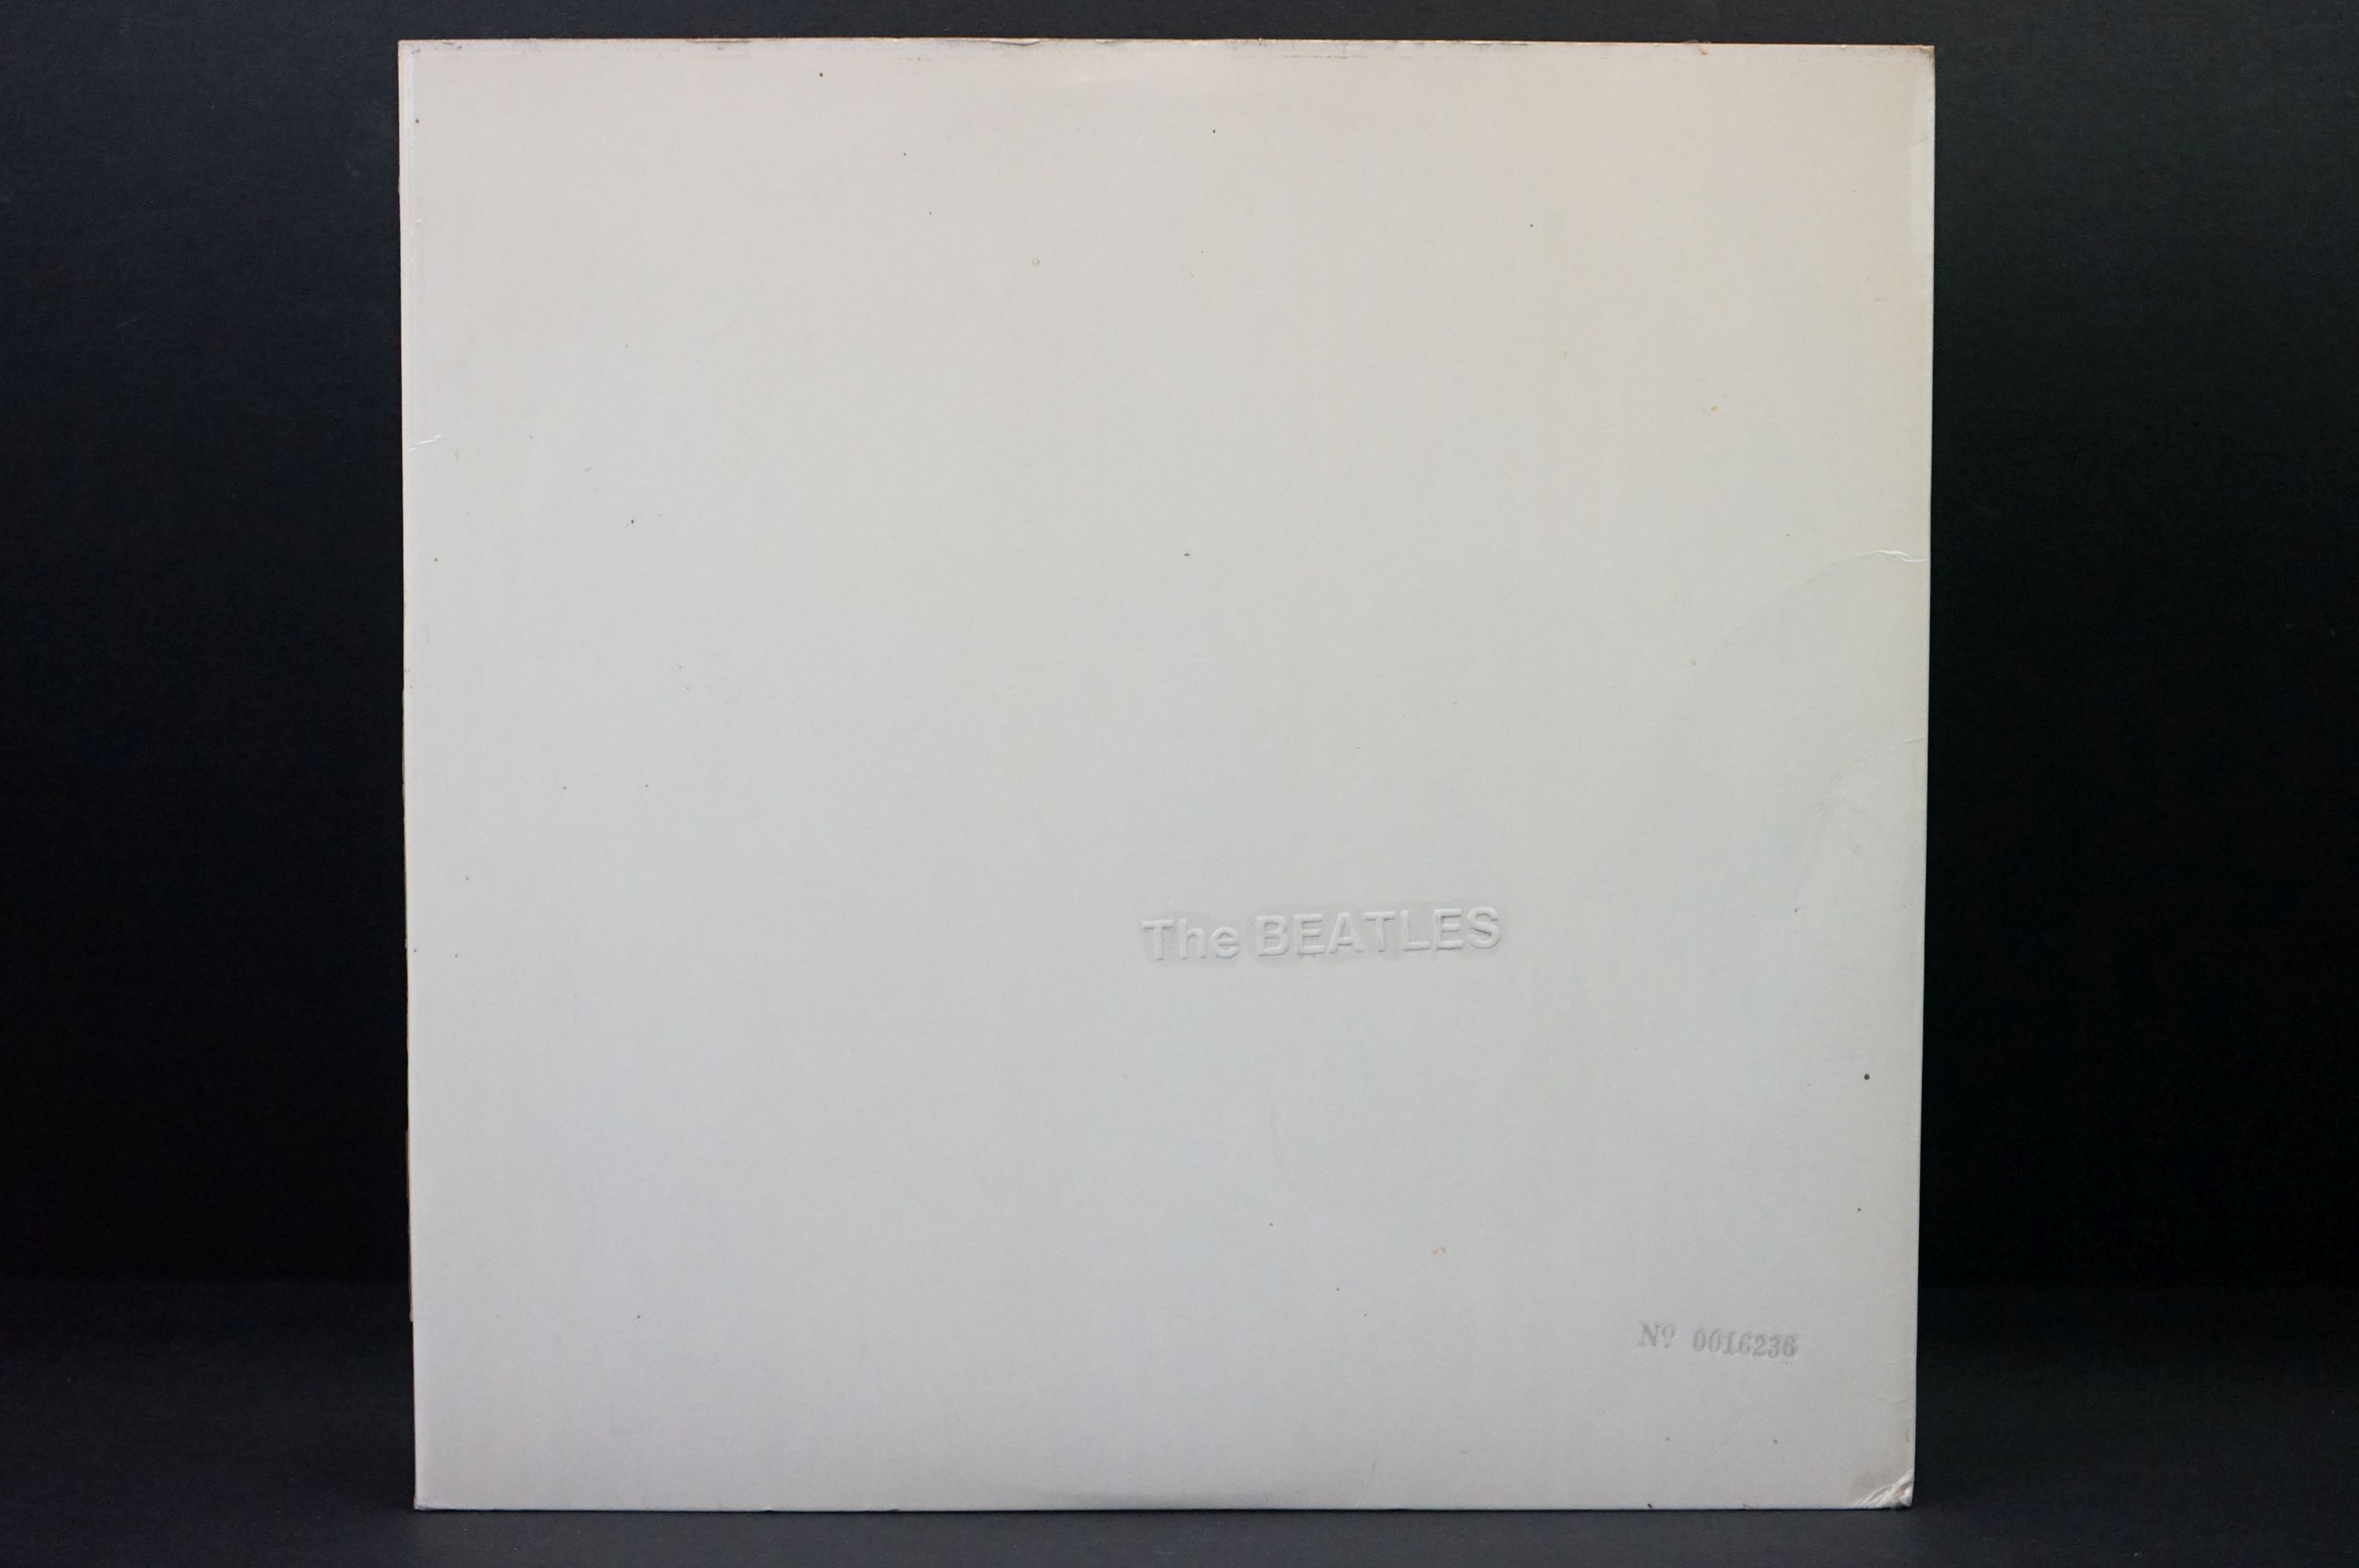 Vinyl - The Beatles White Album PCS 7067/8 low number 0016236. 4 photos and poster present. Sleeve